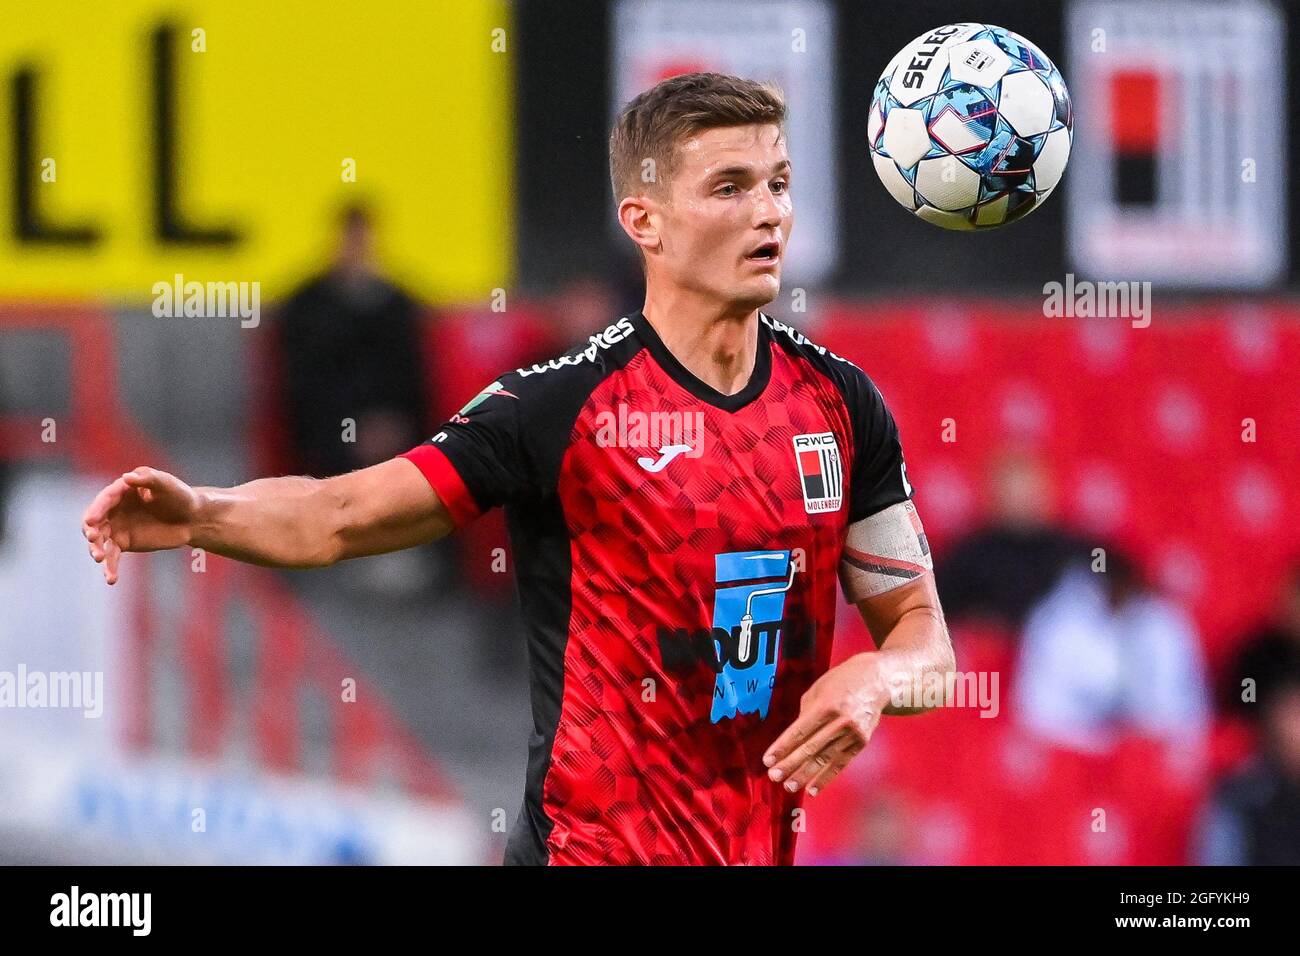 Rwdm's Nicolas Rommens pictured in action during a soccer match between RWDM and Royal Excelsior Virton, Friday 27 August 2021 in Brussels, on day 3 o Stock Photo